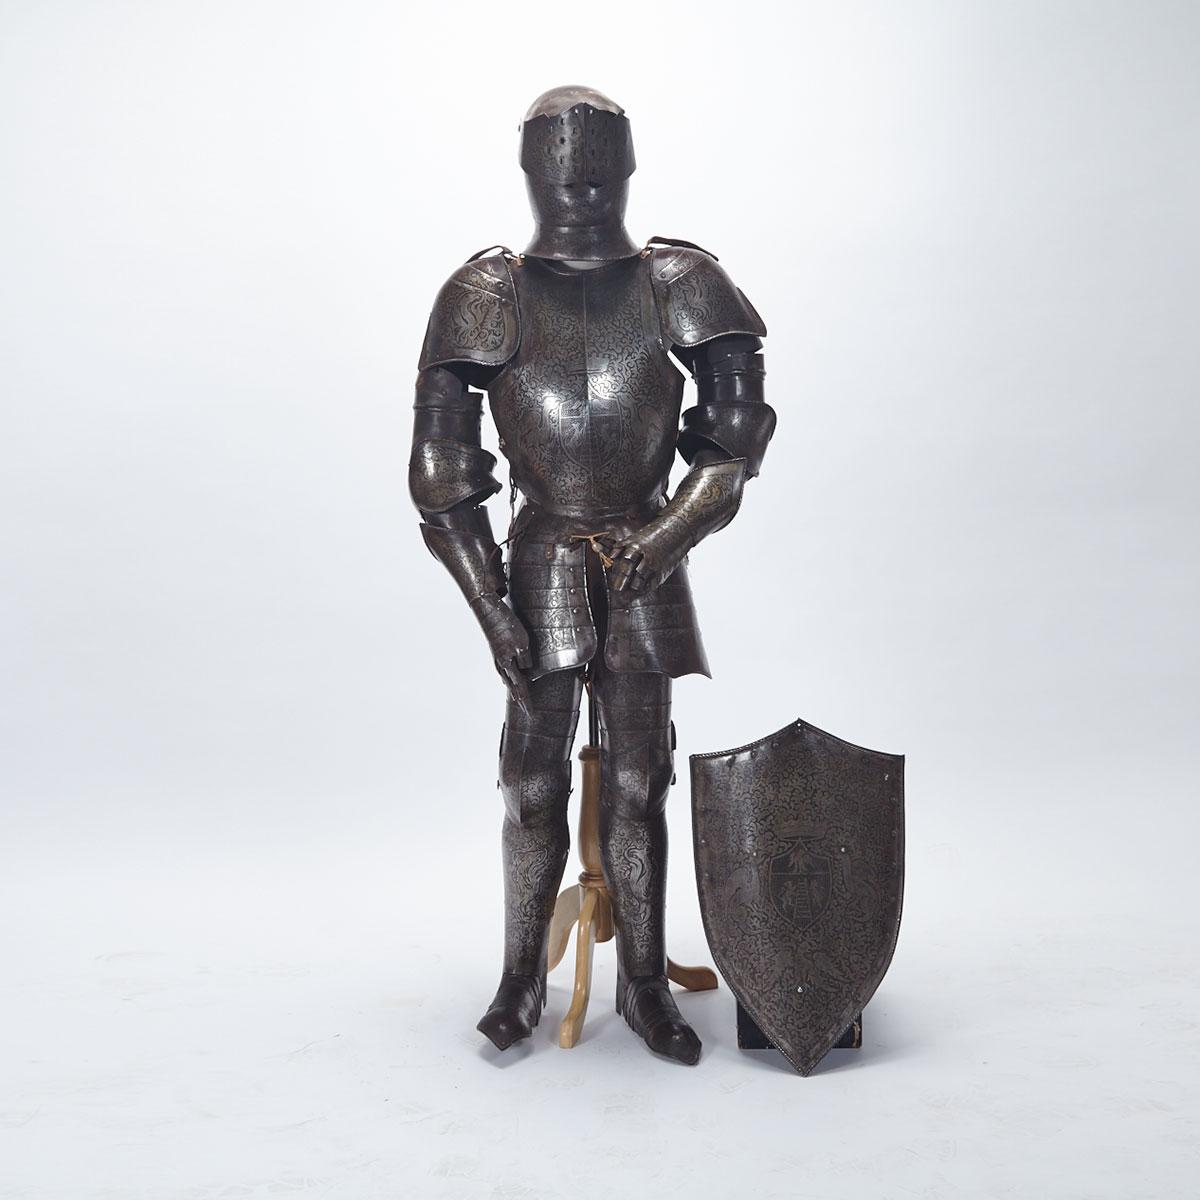 Victorian Full Suit of Armour and Shield in the late 15th century manner, 19th century